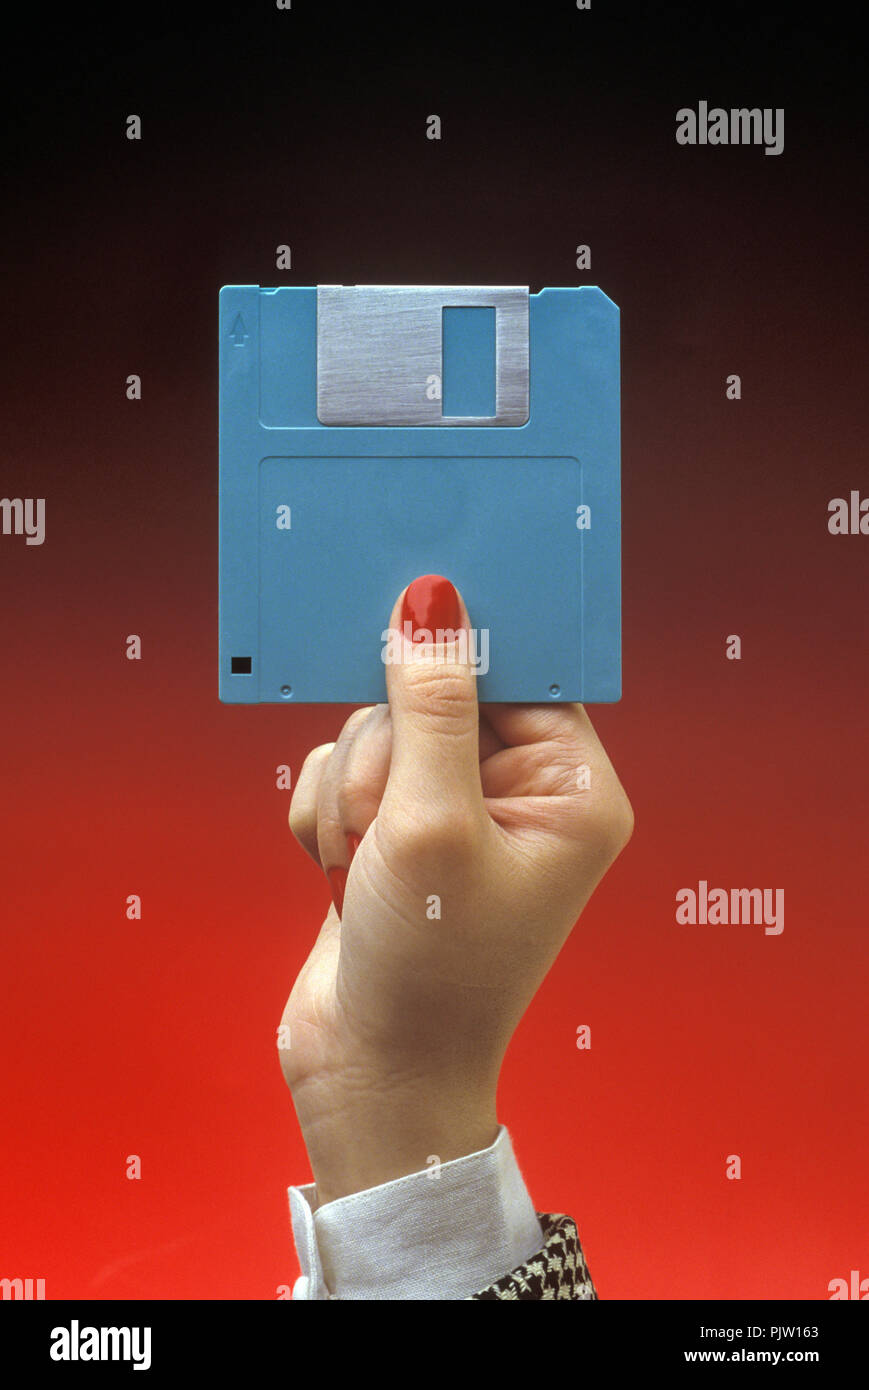 1991 HISTORICAL WOMAN’S HAND AND 3.5 INCH FLOPPY COMPUTER DISCS ON PLAIN RED BACKGROUND (©IBM 1973) Stock Photo